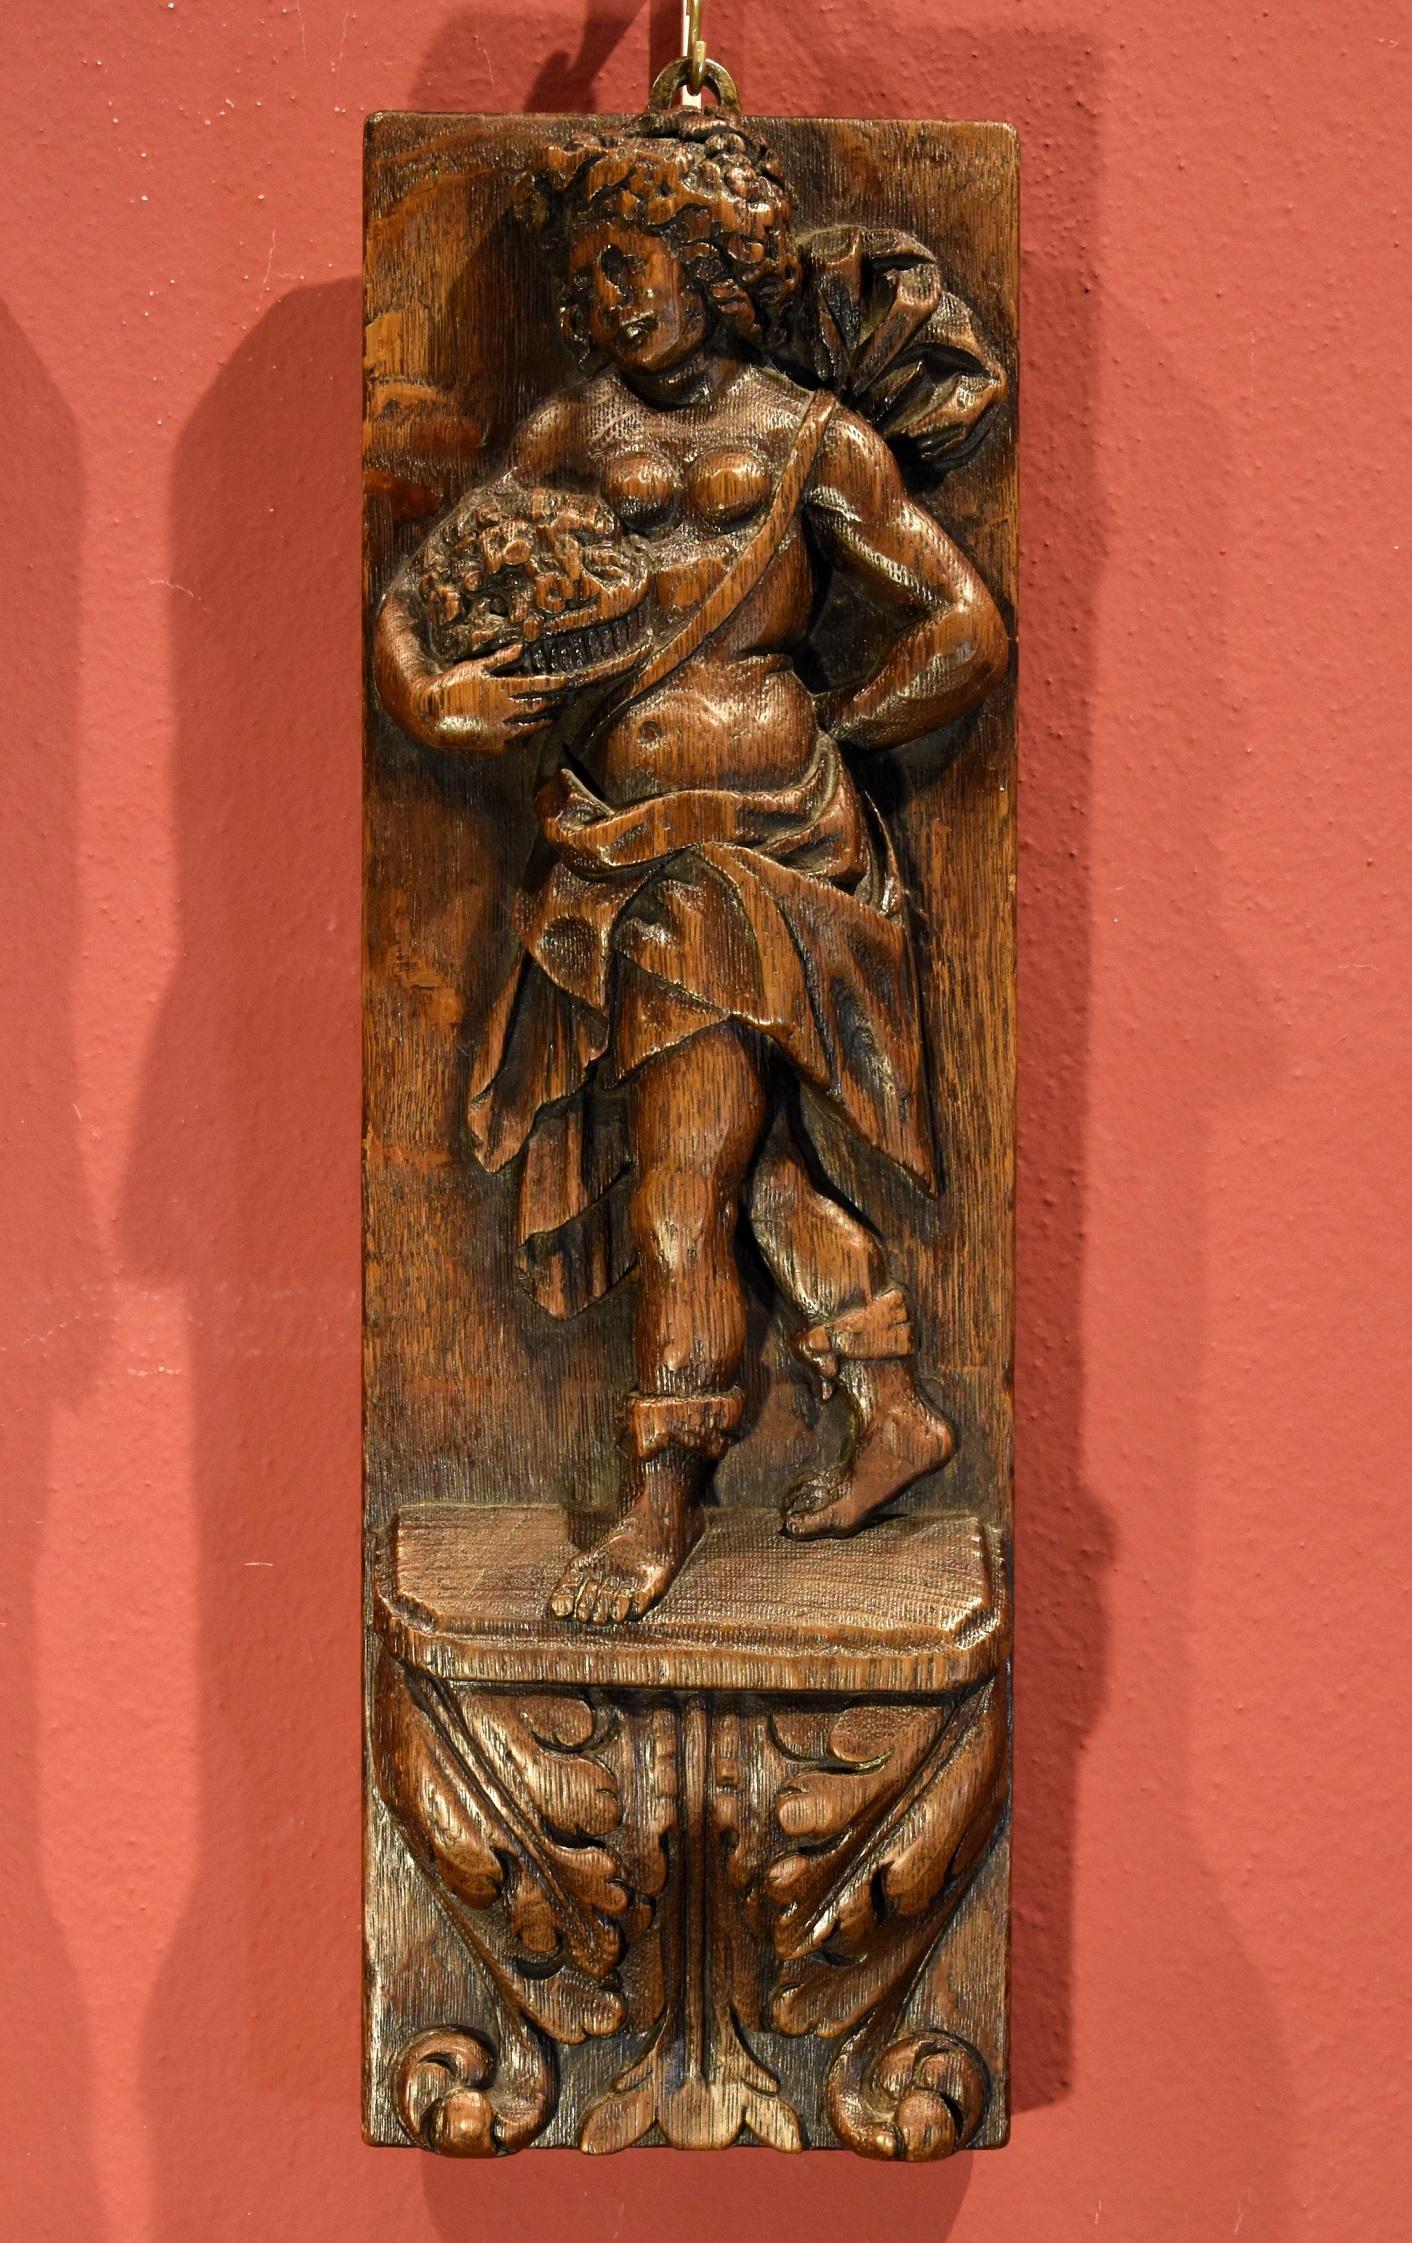 the bronze sculpture called the bas reliefs is associated with the